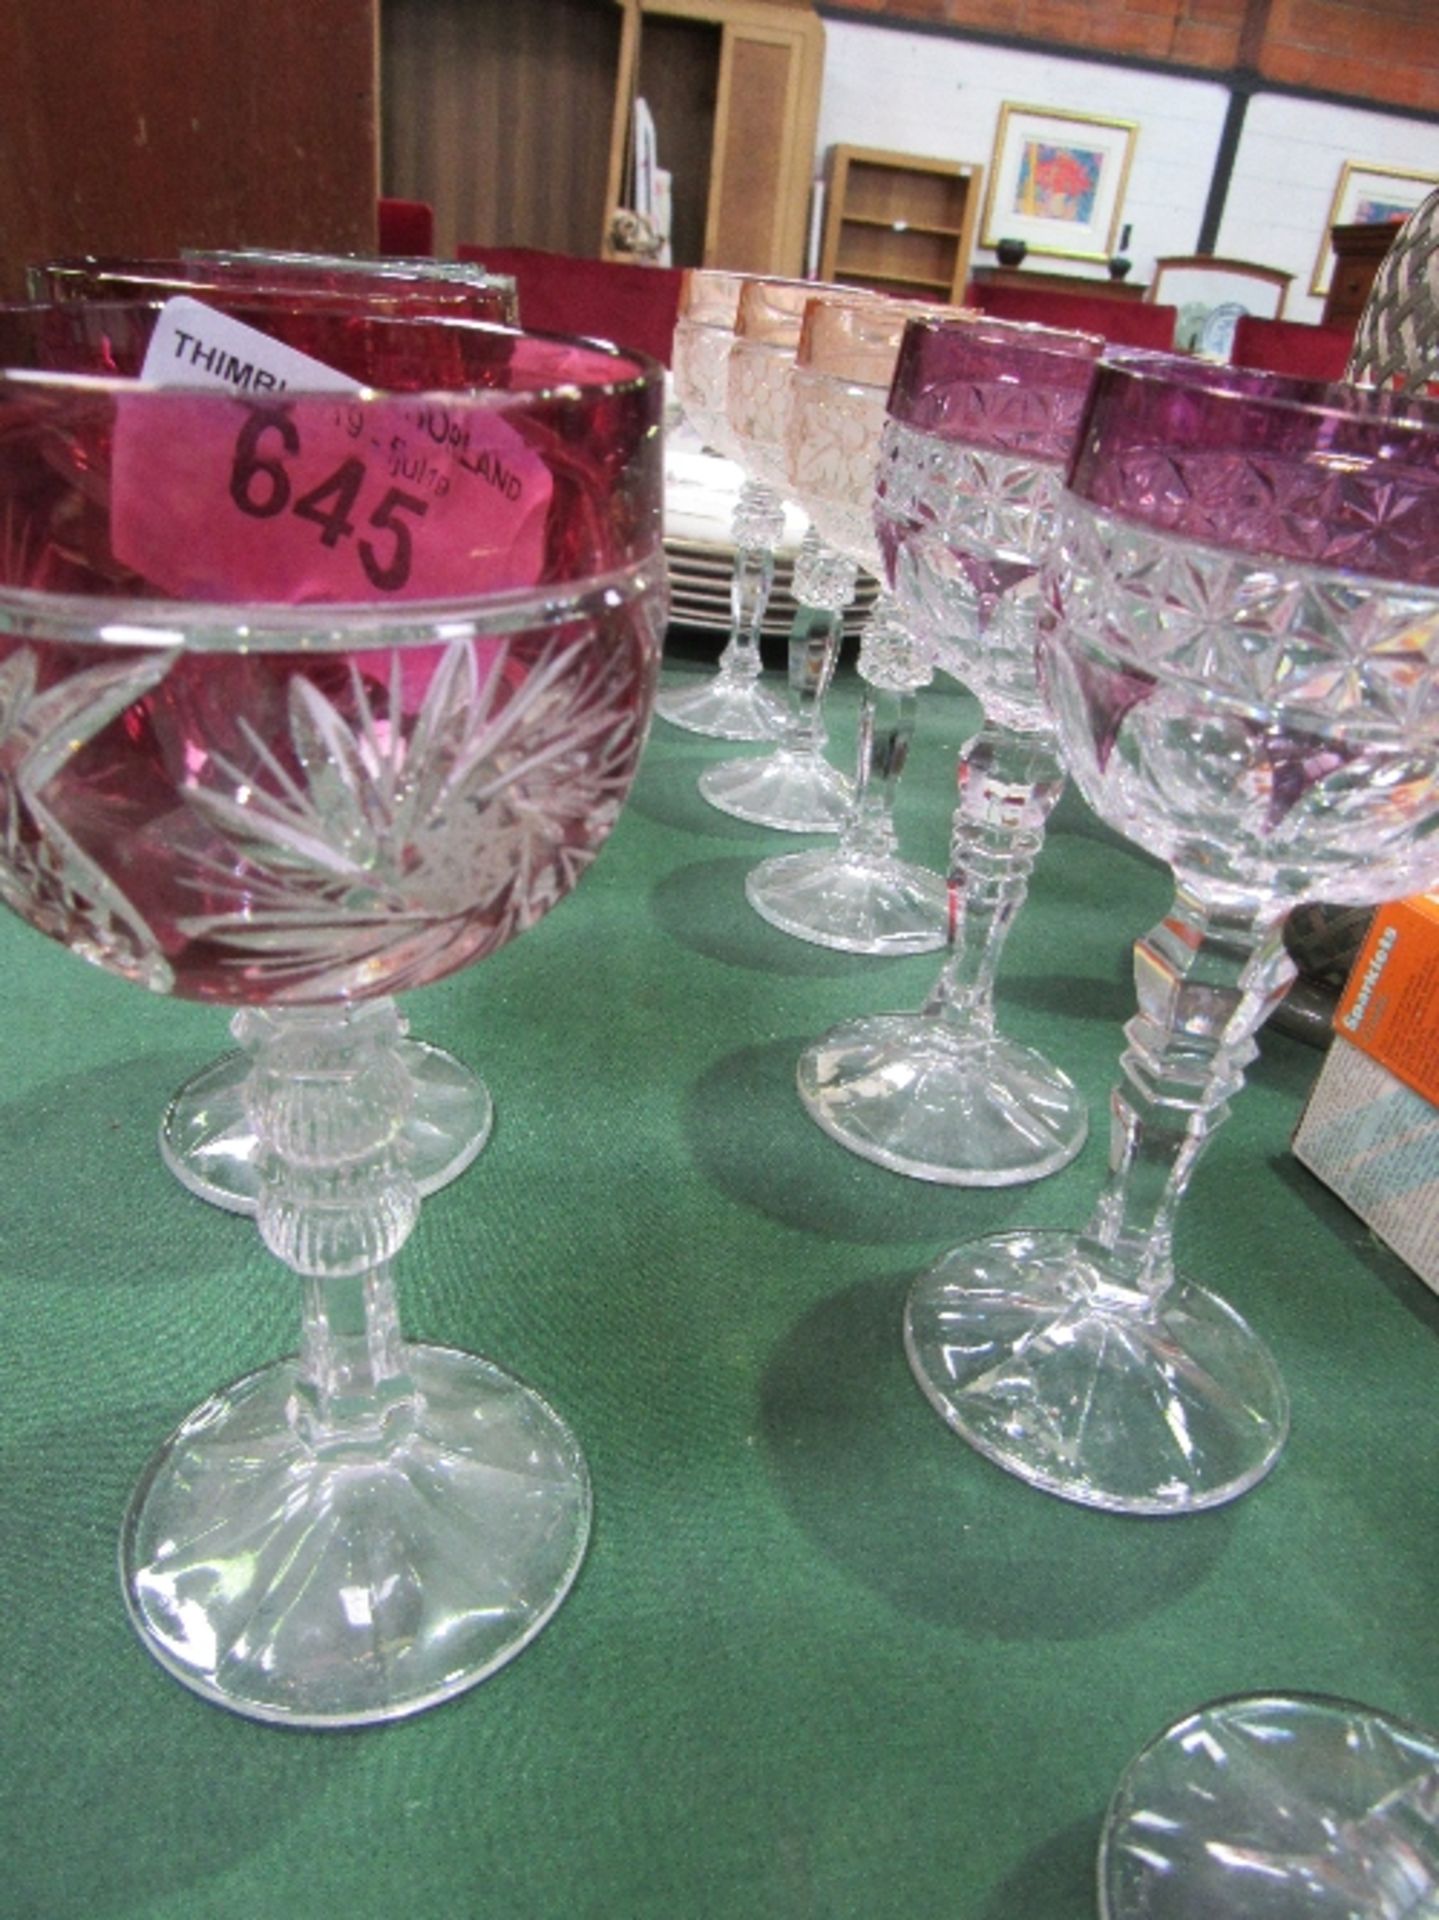 3 sets of 3 + 1 set of 2 Bohemian hock glasses by Nachtmann. Estimate £60-80. - Image 3 of 3